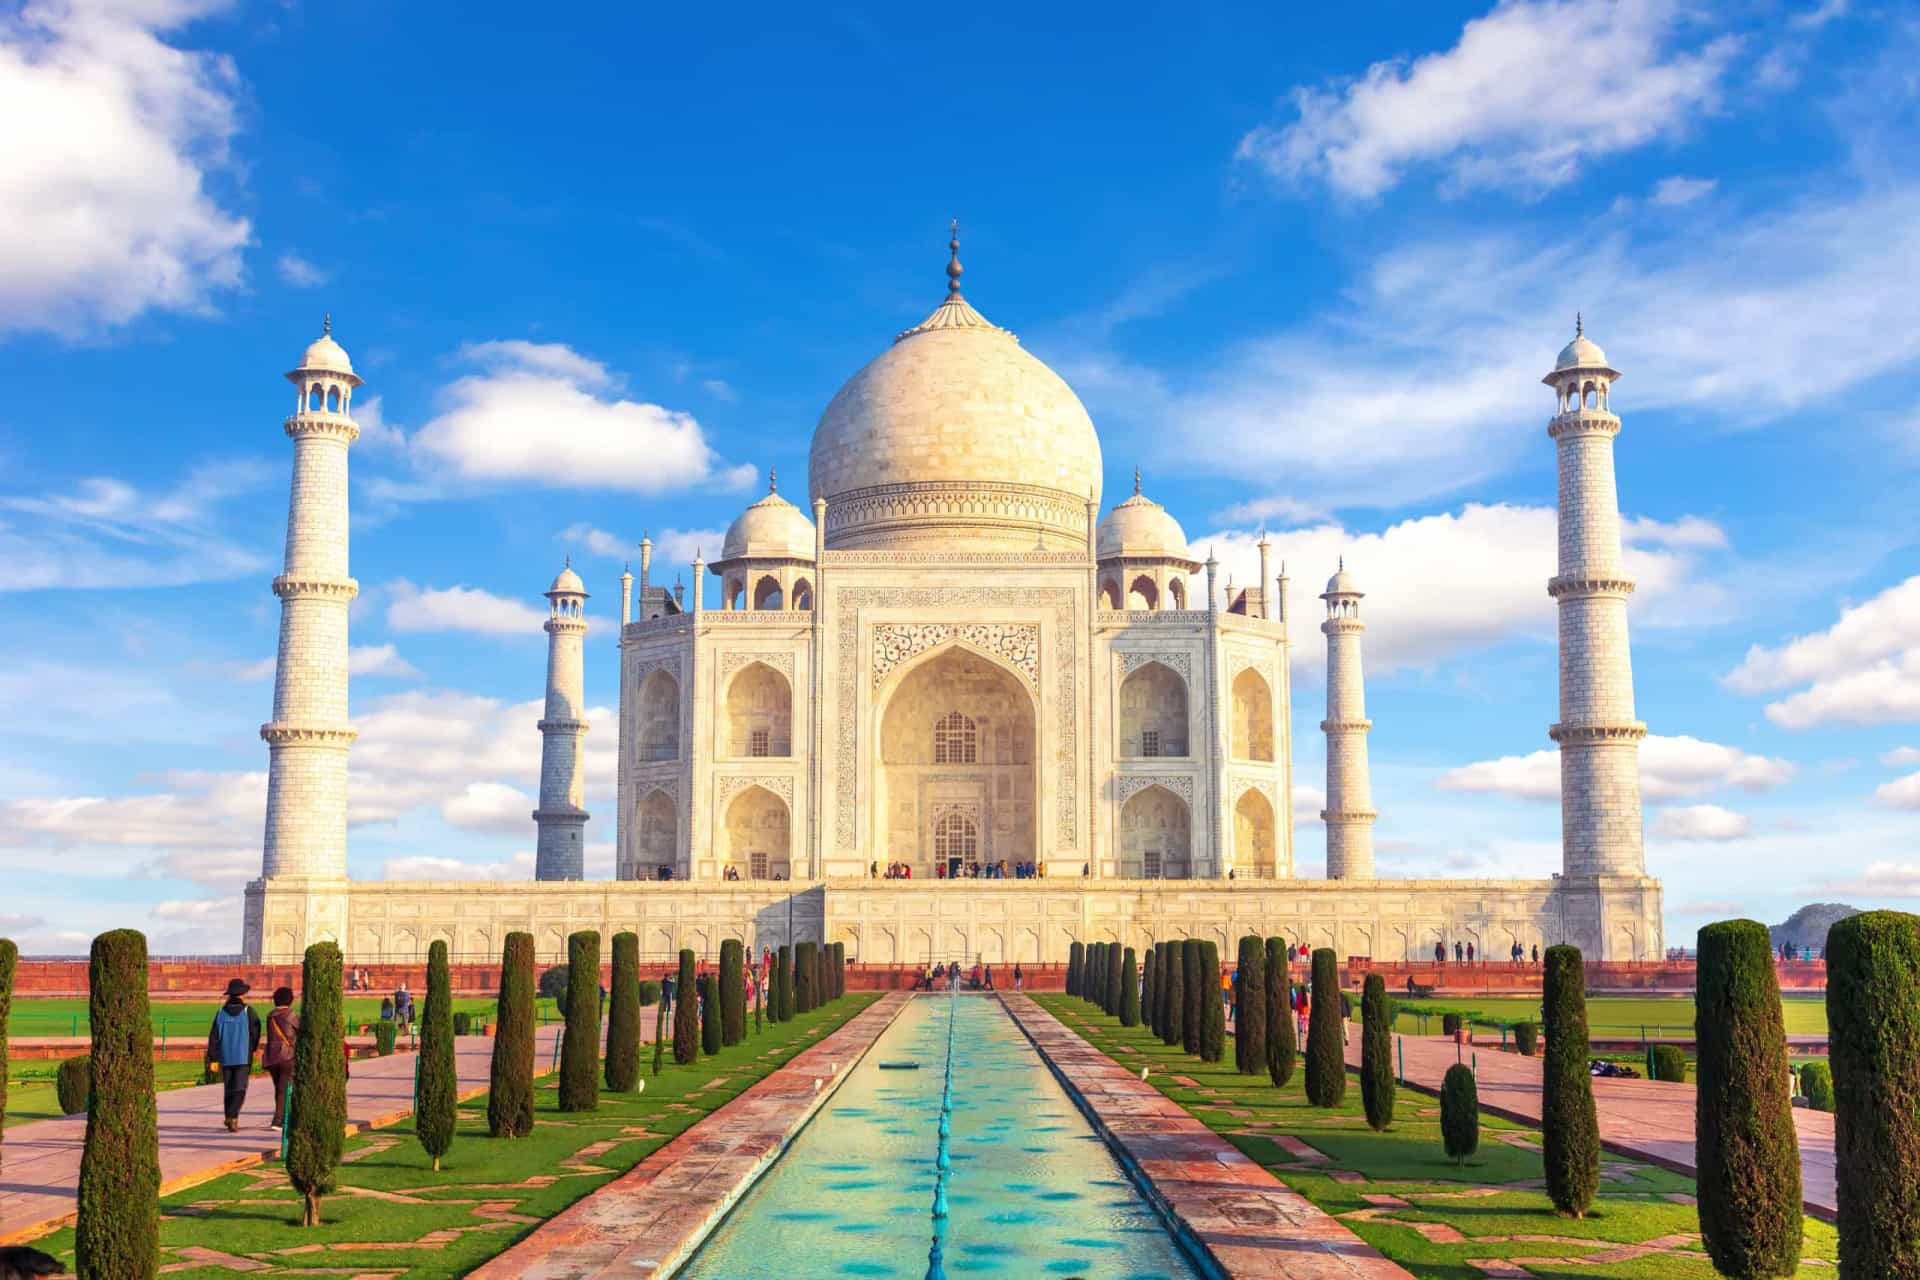 <p>Attracted to love and beauty, a Leo will truly appreciate the Taj Mahal, not only for its greatness but also for its history. Built as a monument of love by Emperor Shah Jahan in memory of his wife Mumtaz Mahal, it will make a Leo crave a great romantic gesture.</p>